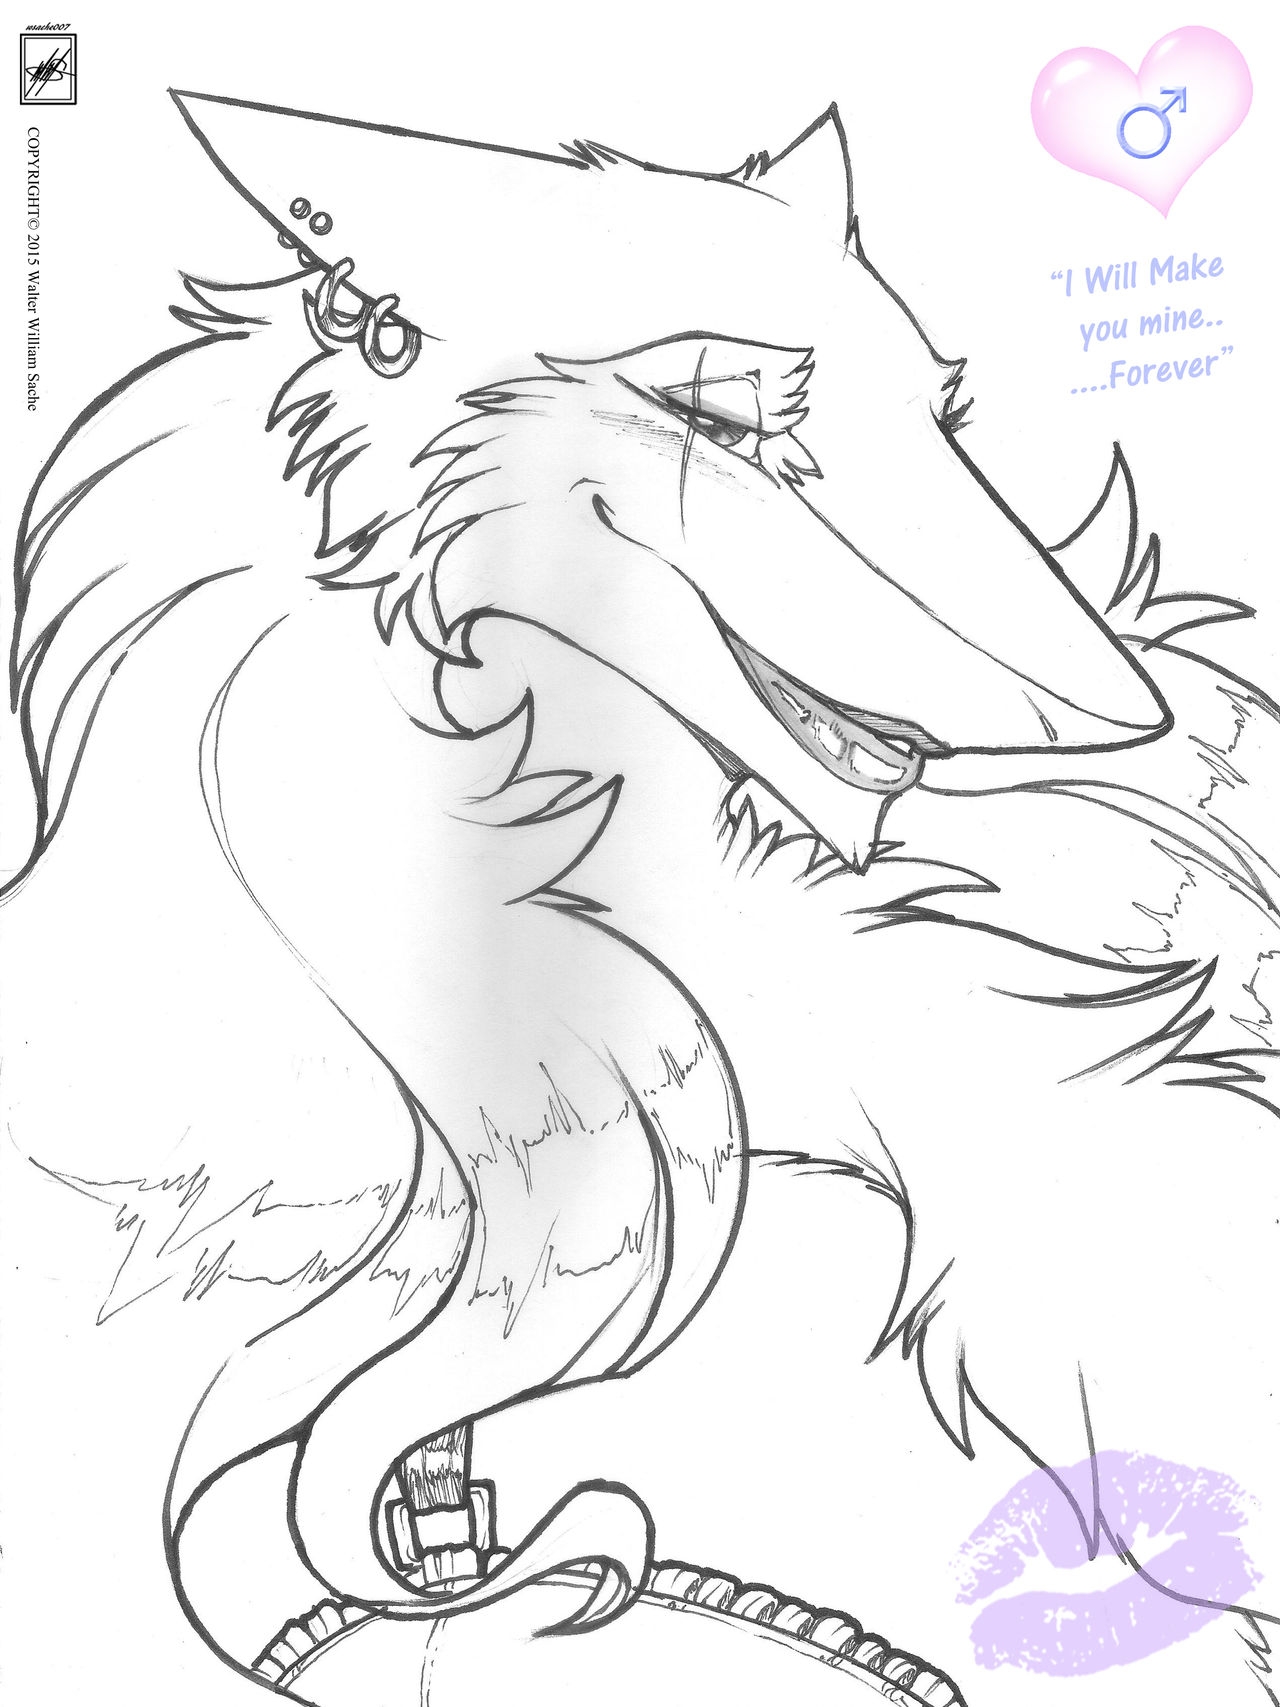 Walter Sache's OC-Characters: [Vallery the Sergal & Co.]{ February 9, 2011 - March 28, 2016} 39